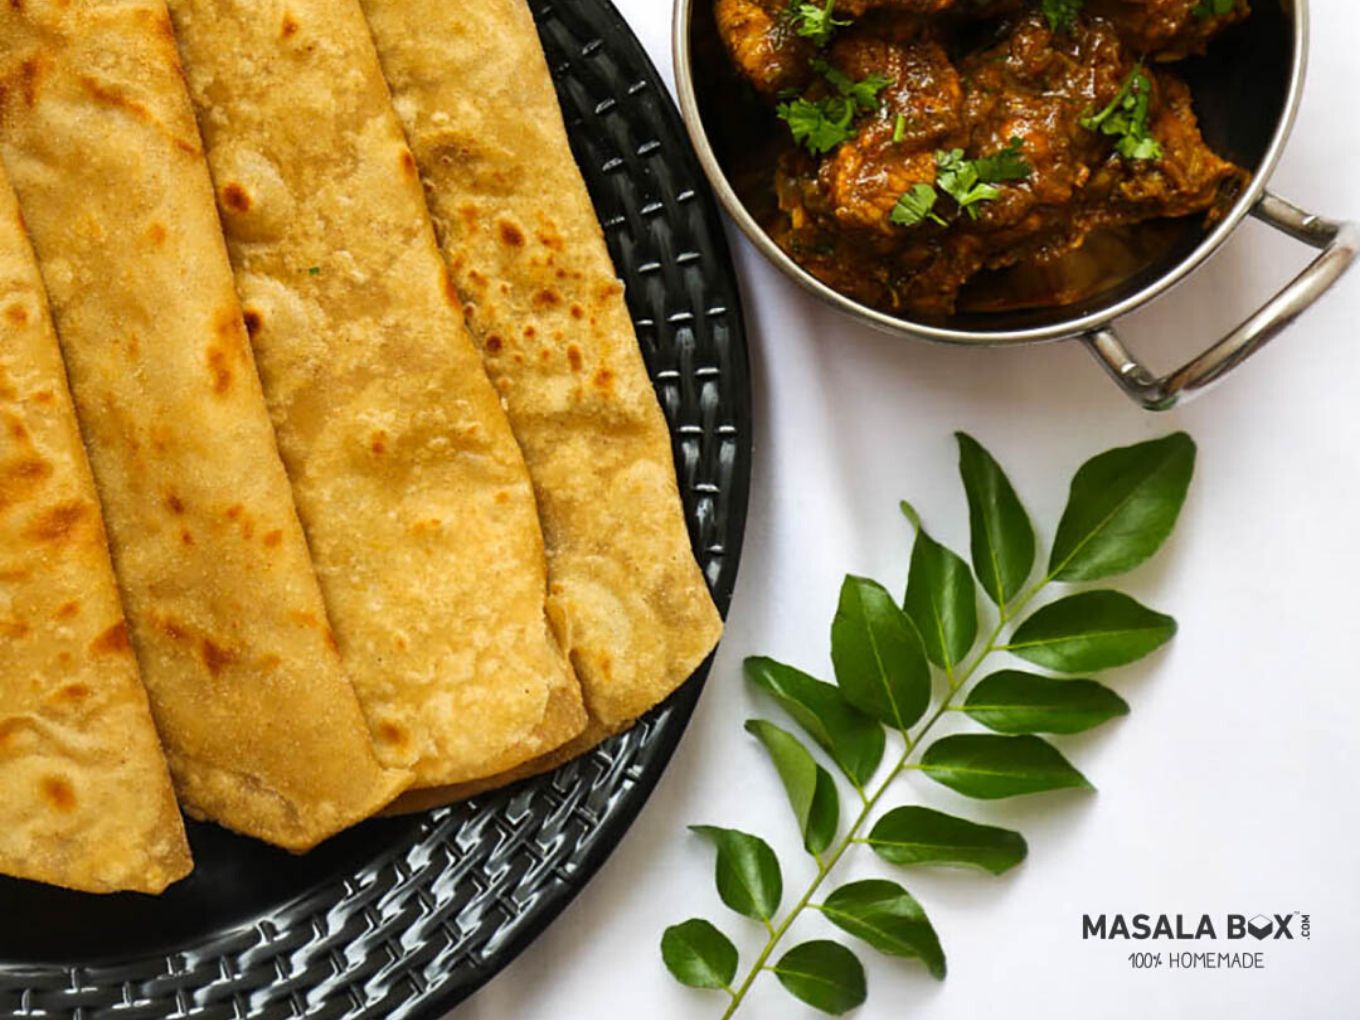 Home Cooking Platform Masalabox Spices Up India’s Food Startup Space